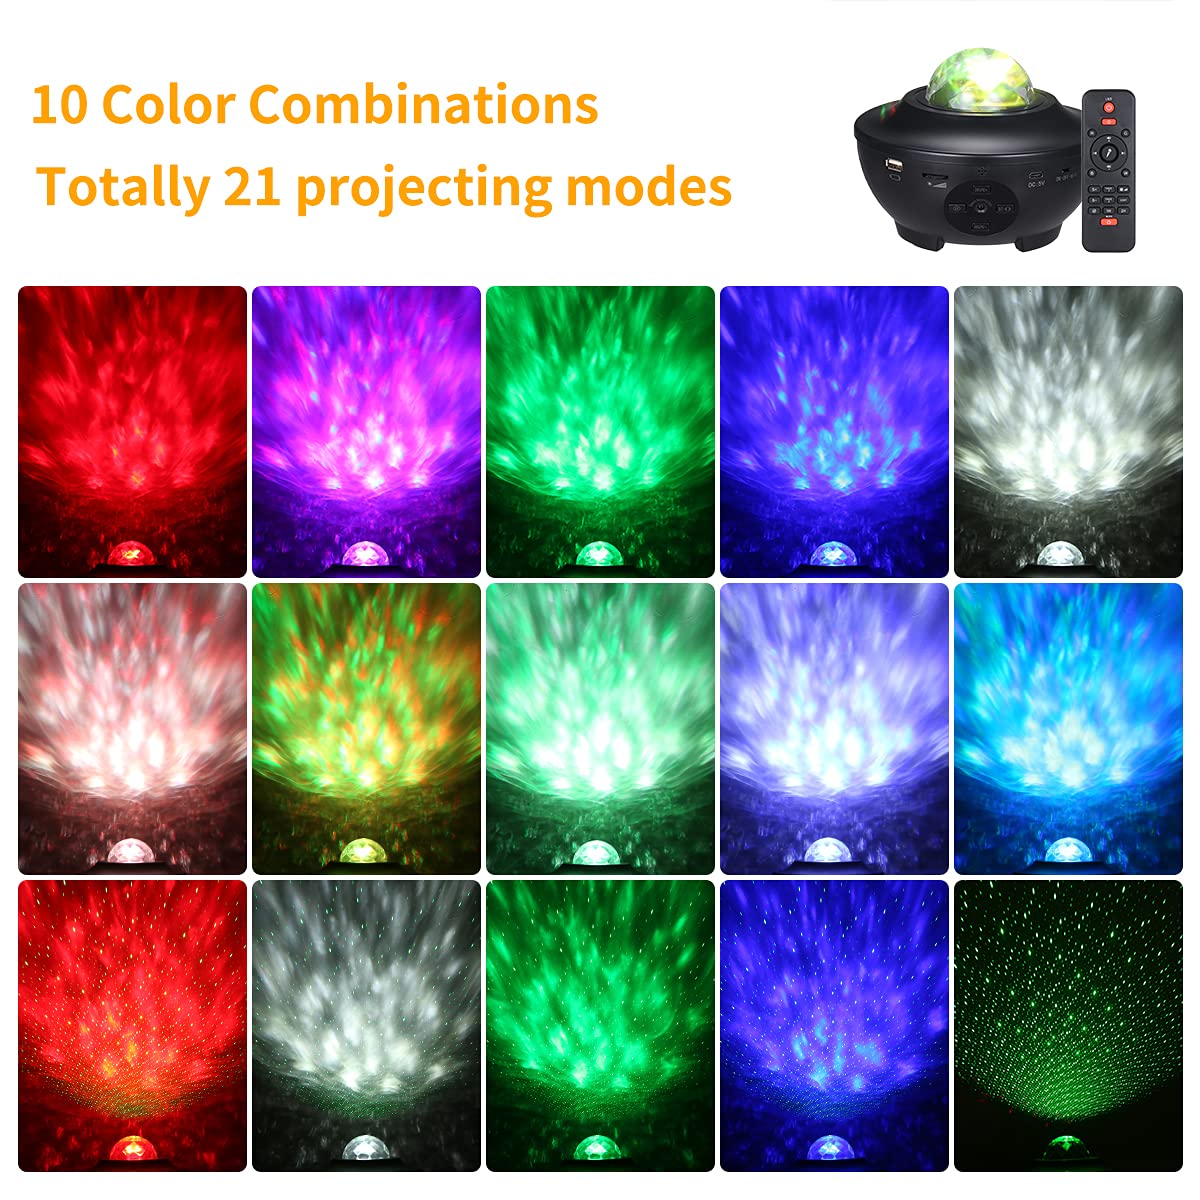 Smart Star Projector Night Light,Tom-shine WiFi Galaxy Projector Light Bluetooth Music Speaker Ocean Wave Nebula Cloud Works with Alexa Google Home,Gifts for Baby Kids Bedroom Decor Christmas Party